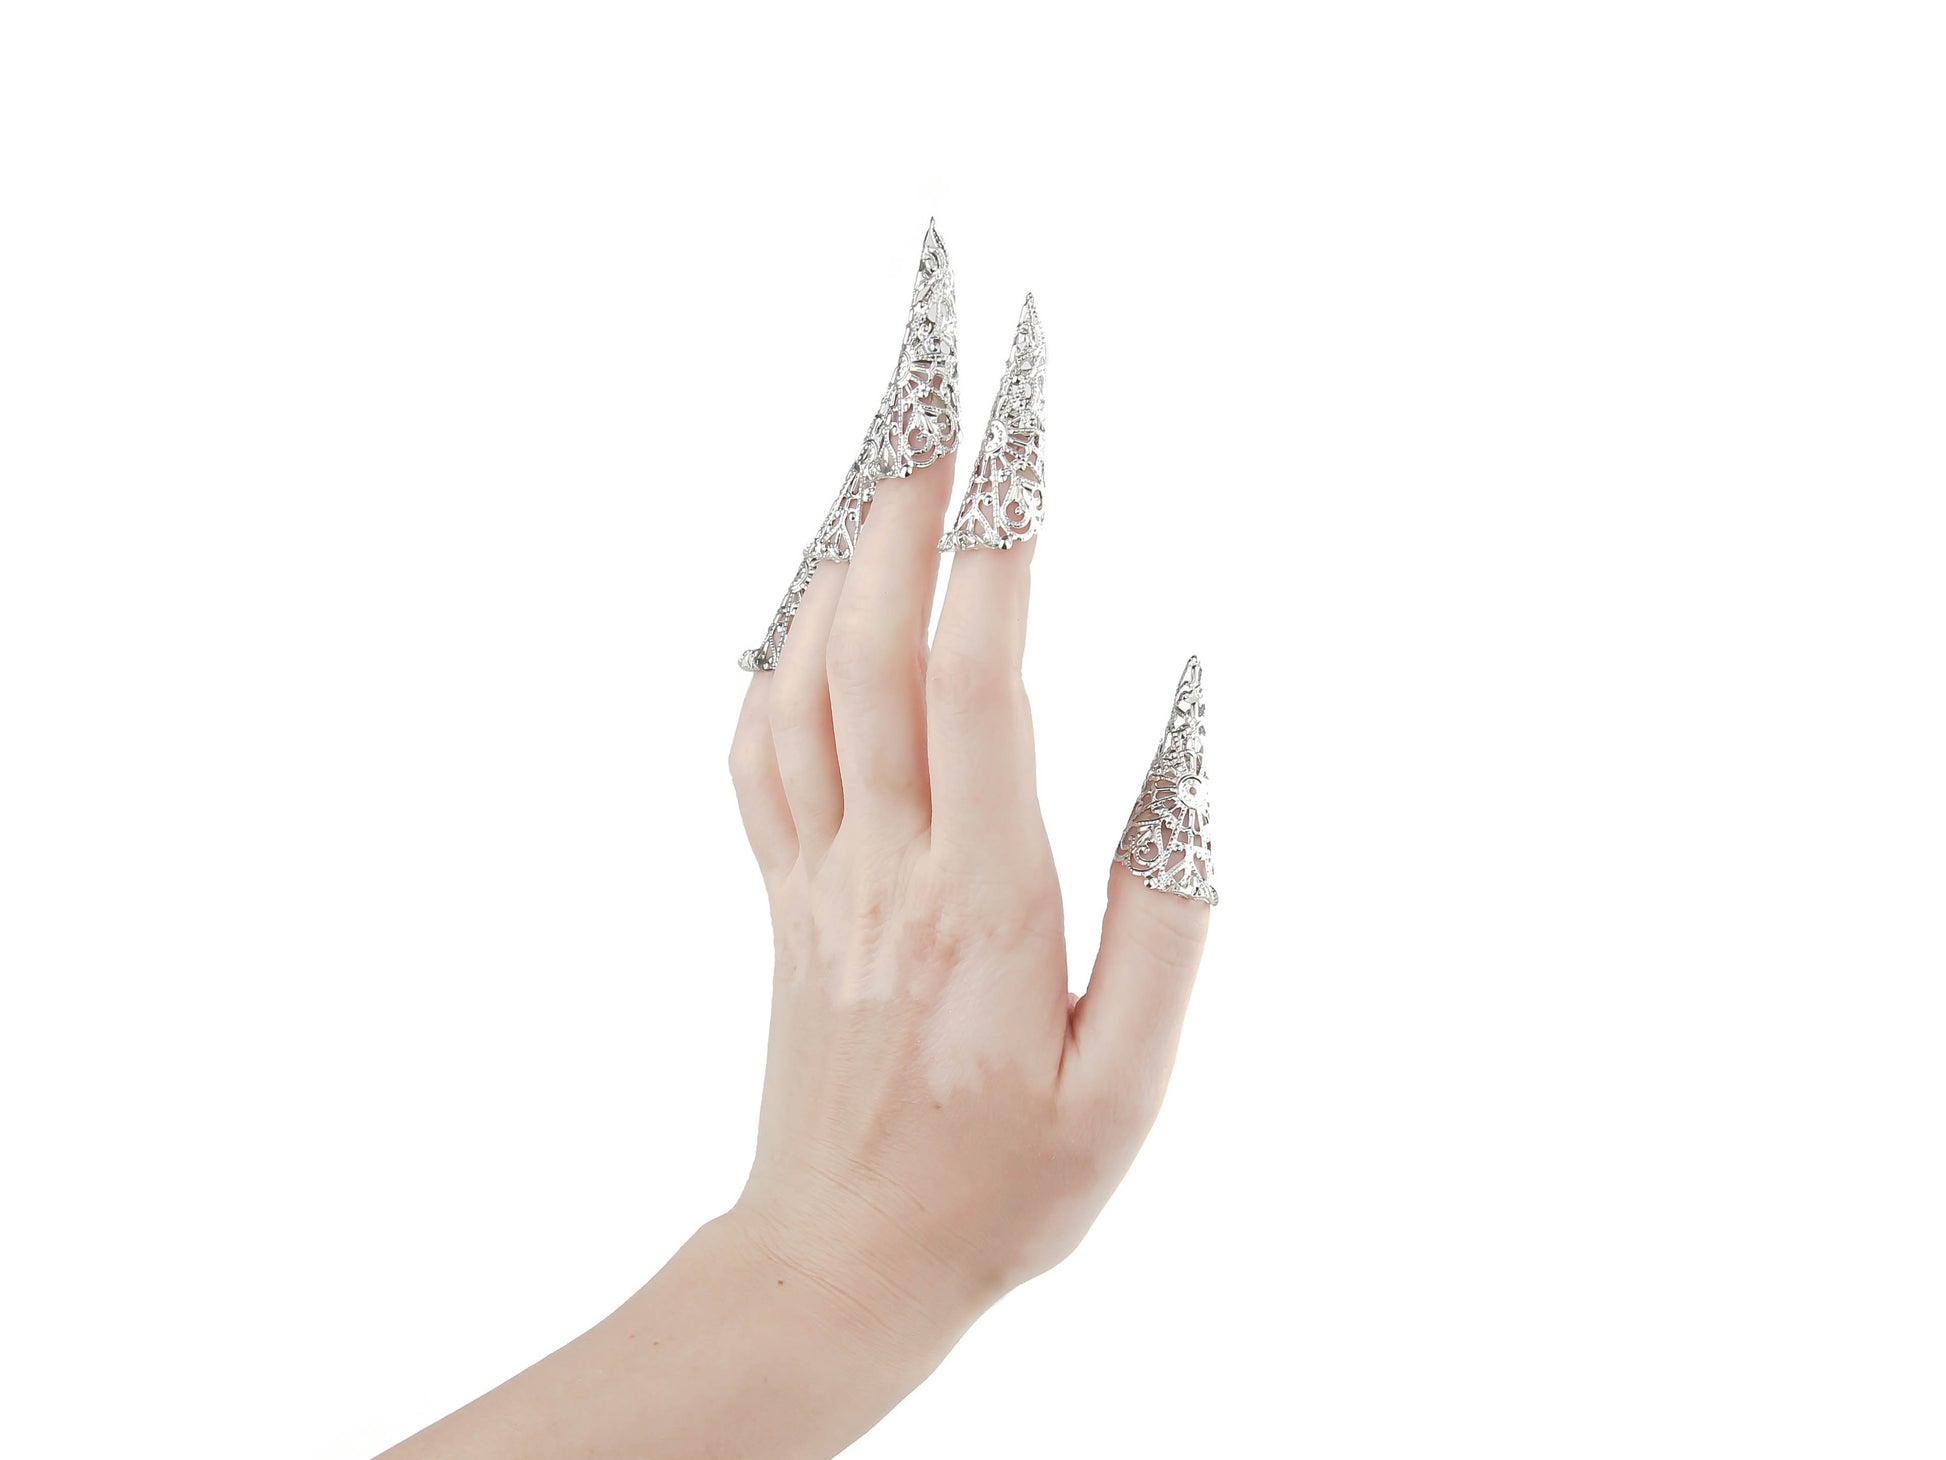 A hand models Myril Jewels' full set of nail claws, exquisitely crafted with intricate silver filigree that emulates the neo-gothic aesthetic. These lavish claw pieces are perfect for those who admire dark-avantgarde fashion, adding an edgy sophistication to any Halloween, punk, or gothic-chic look. They're also ideal for witchcore enthusiasts, and as an eye-catching accessory for rave parties and festival-goers seeking unique, handcrafted jewelry.